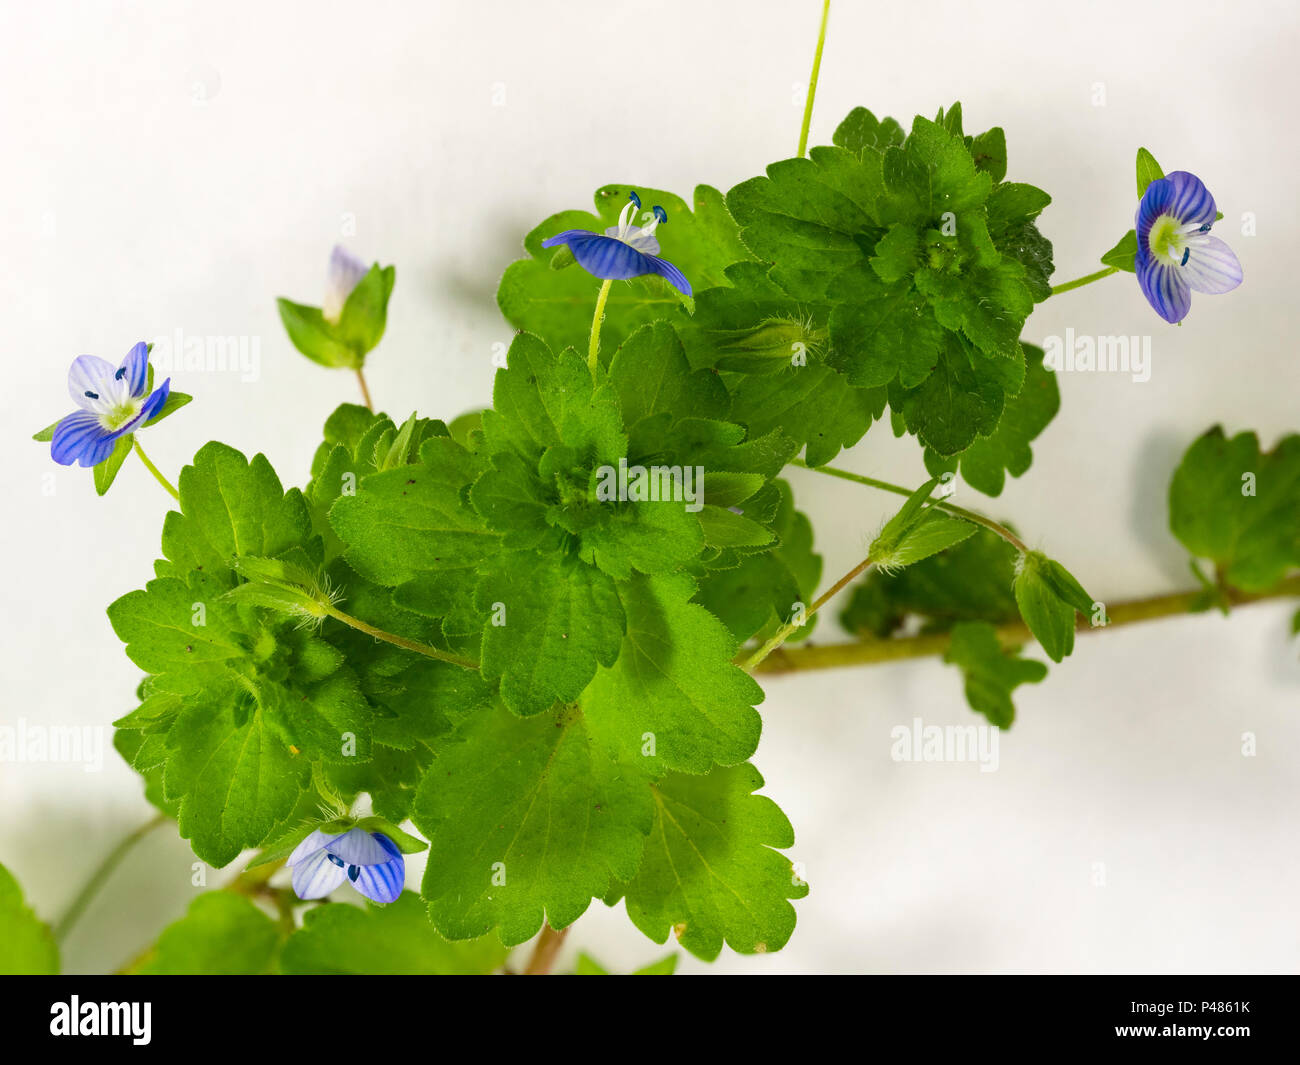 Flowers of the common field speedwell, Veronica persica, a garden weed.  Focus stacked studio image. Stock Photo